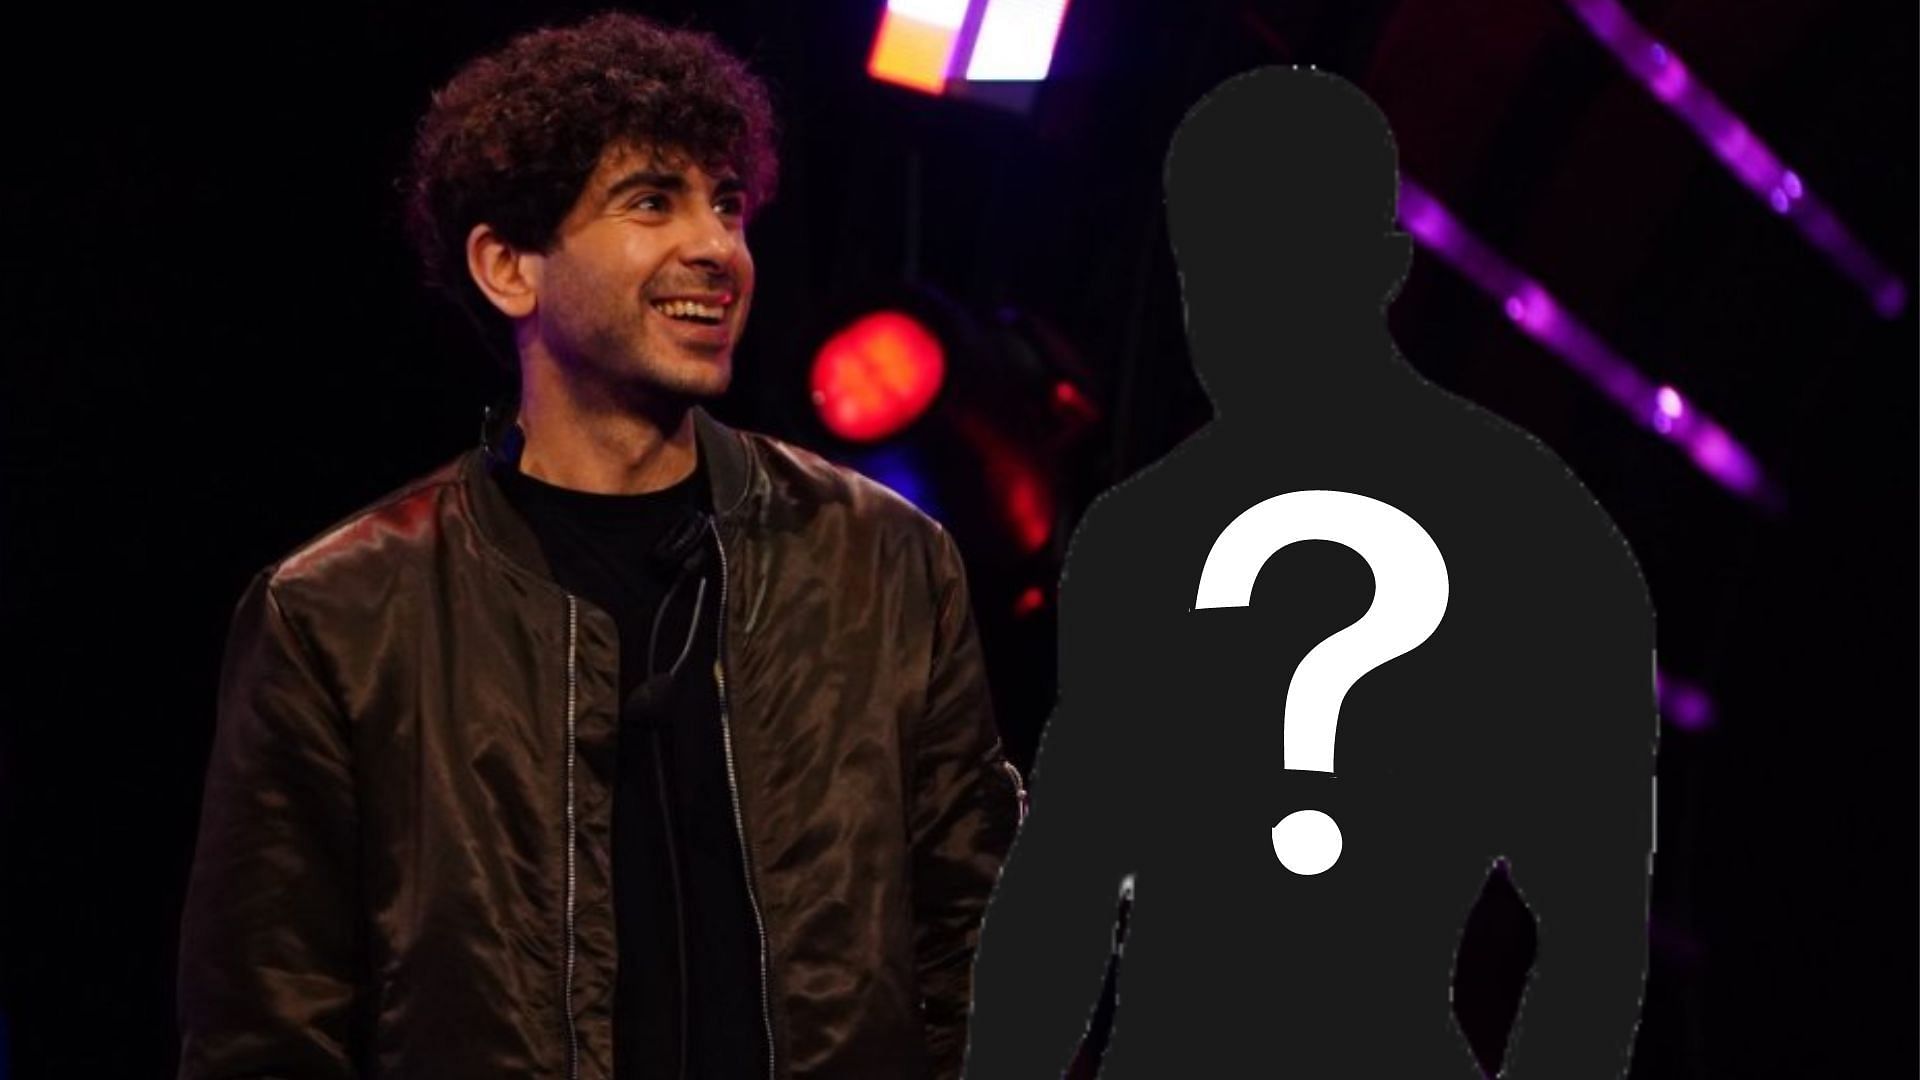 Could Tony Khan have been scouting new talent?